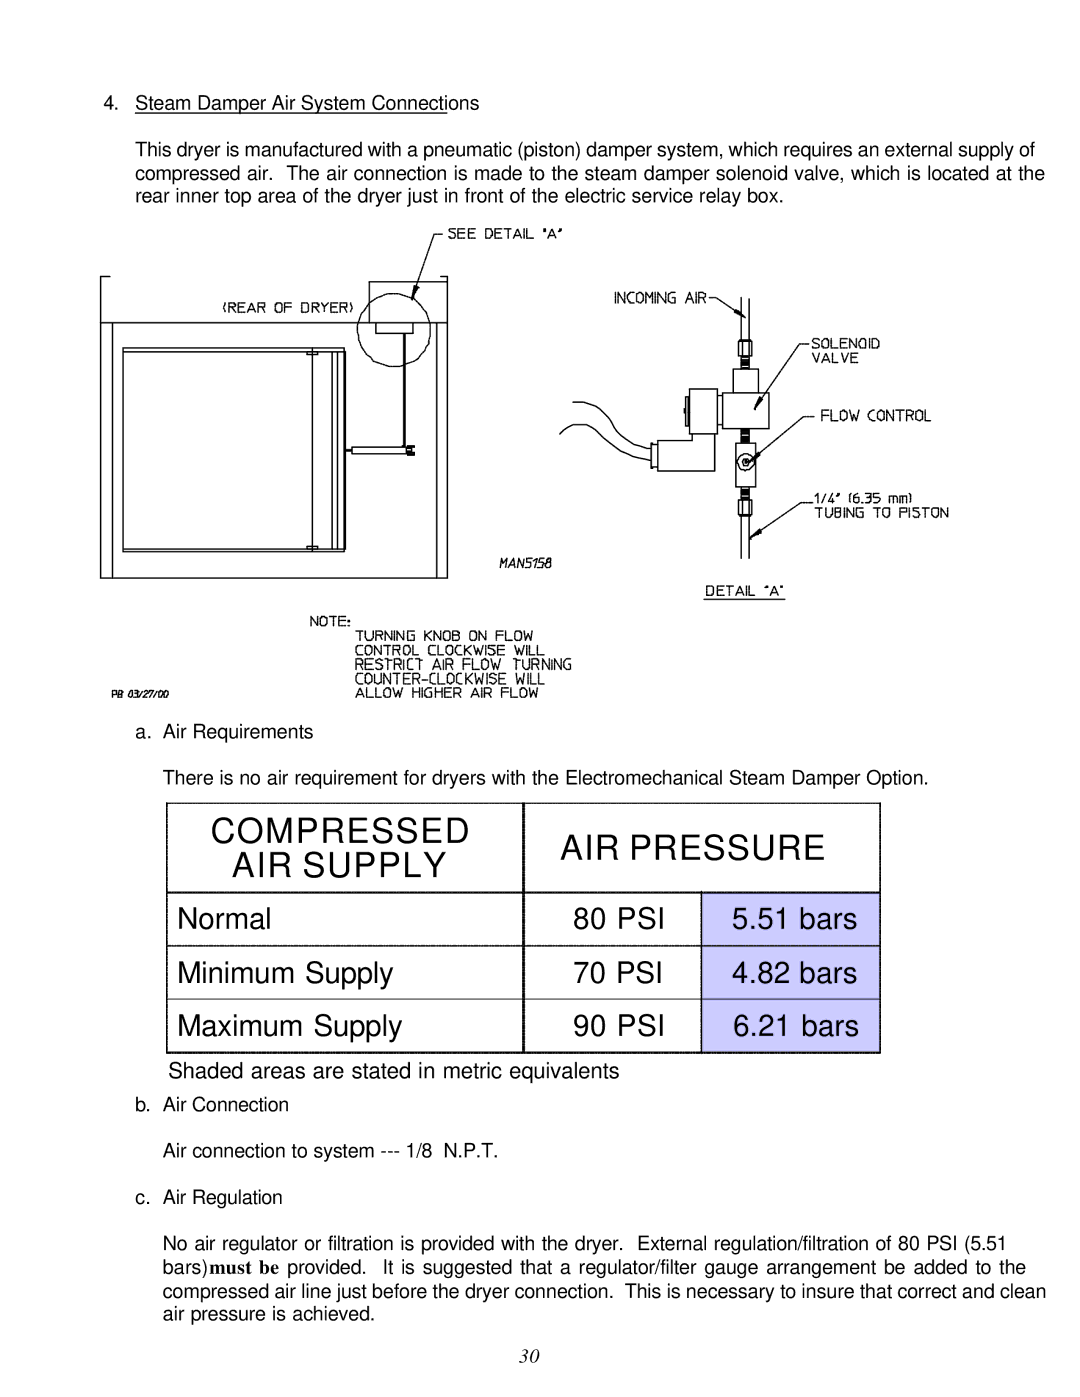 American Dryer Corp D-40 installation manual Compressed AIR Pressure AIR Supply 